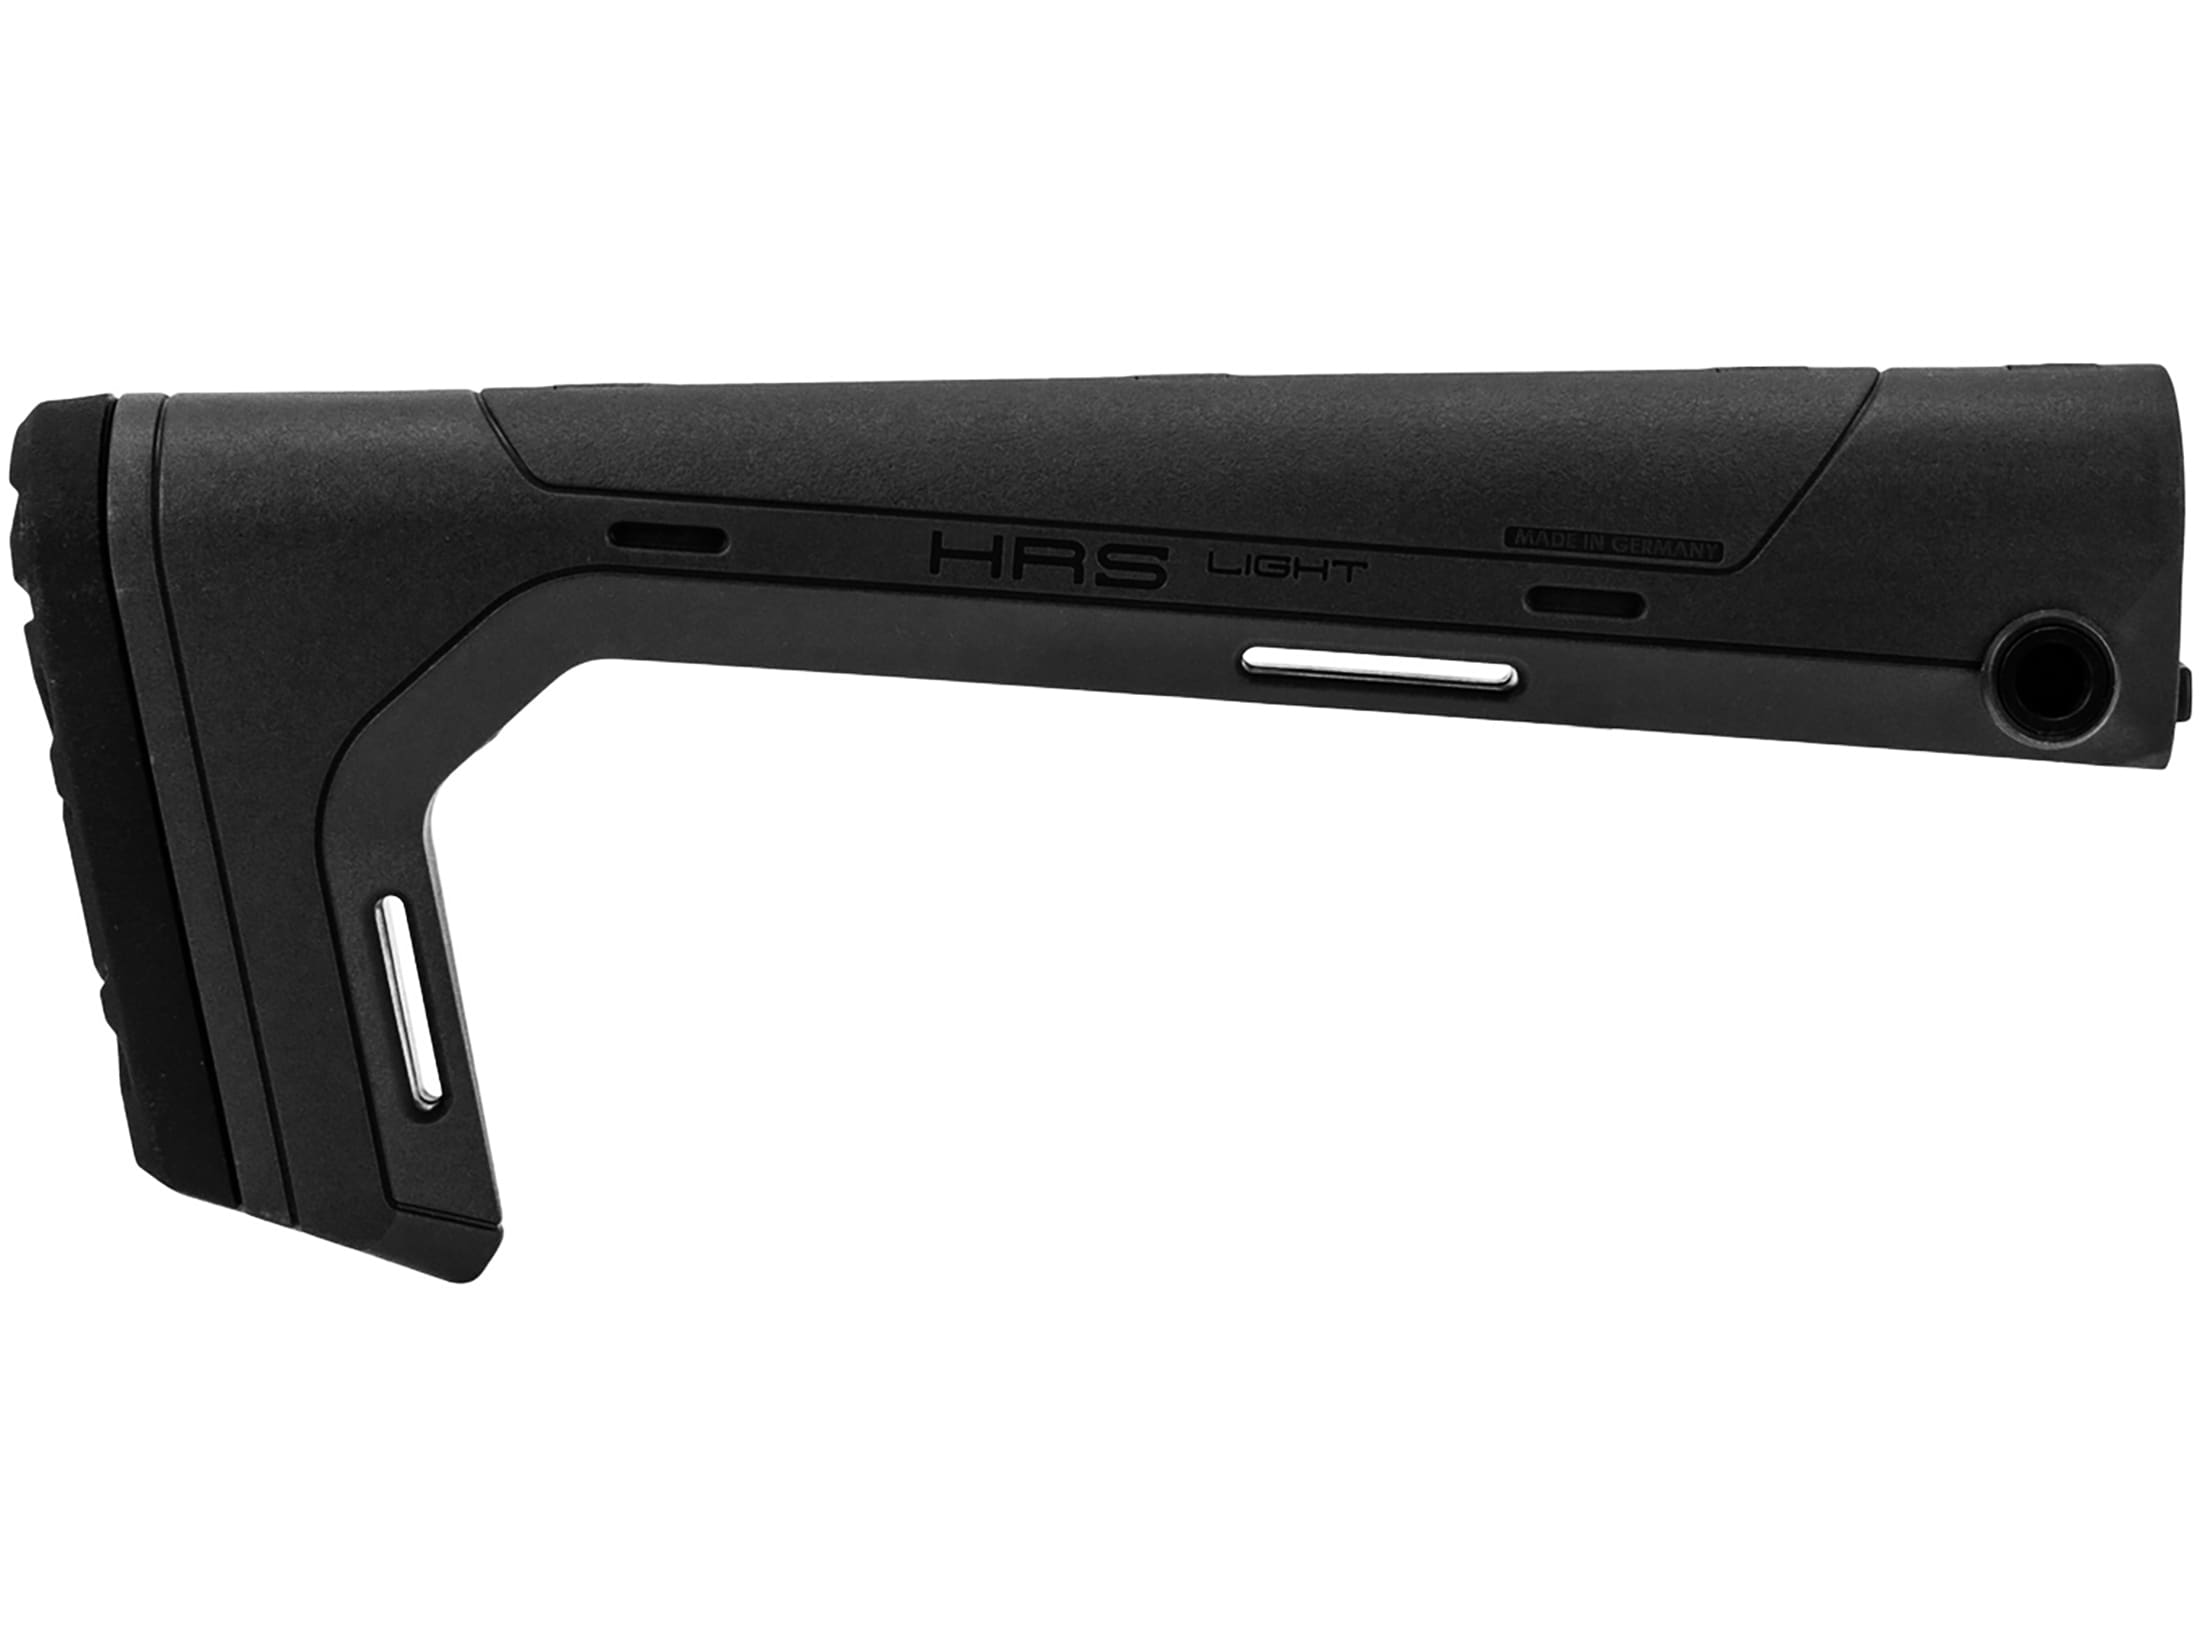 Hera Arms HRS Light Fixed A2 Rifle Stock AR-15 Polymer Black